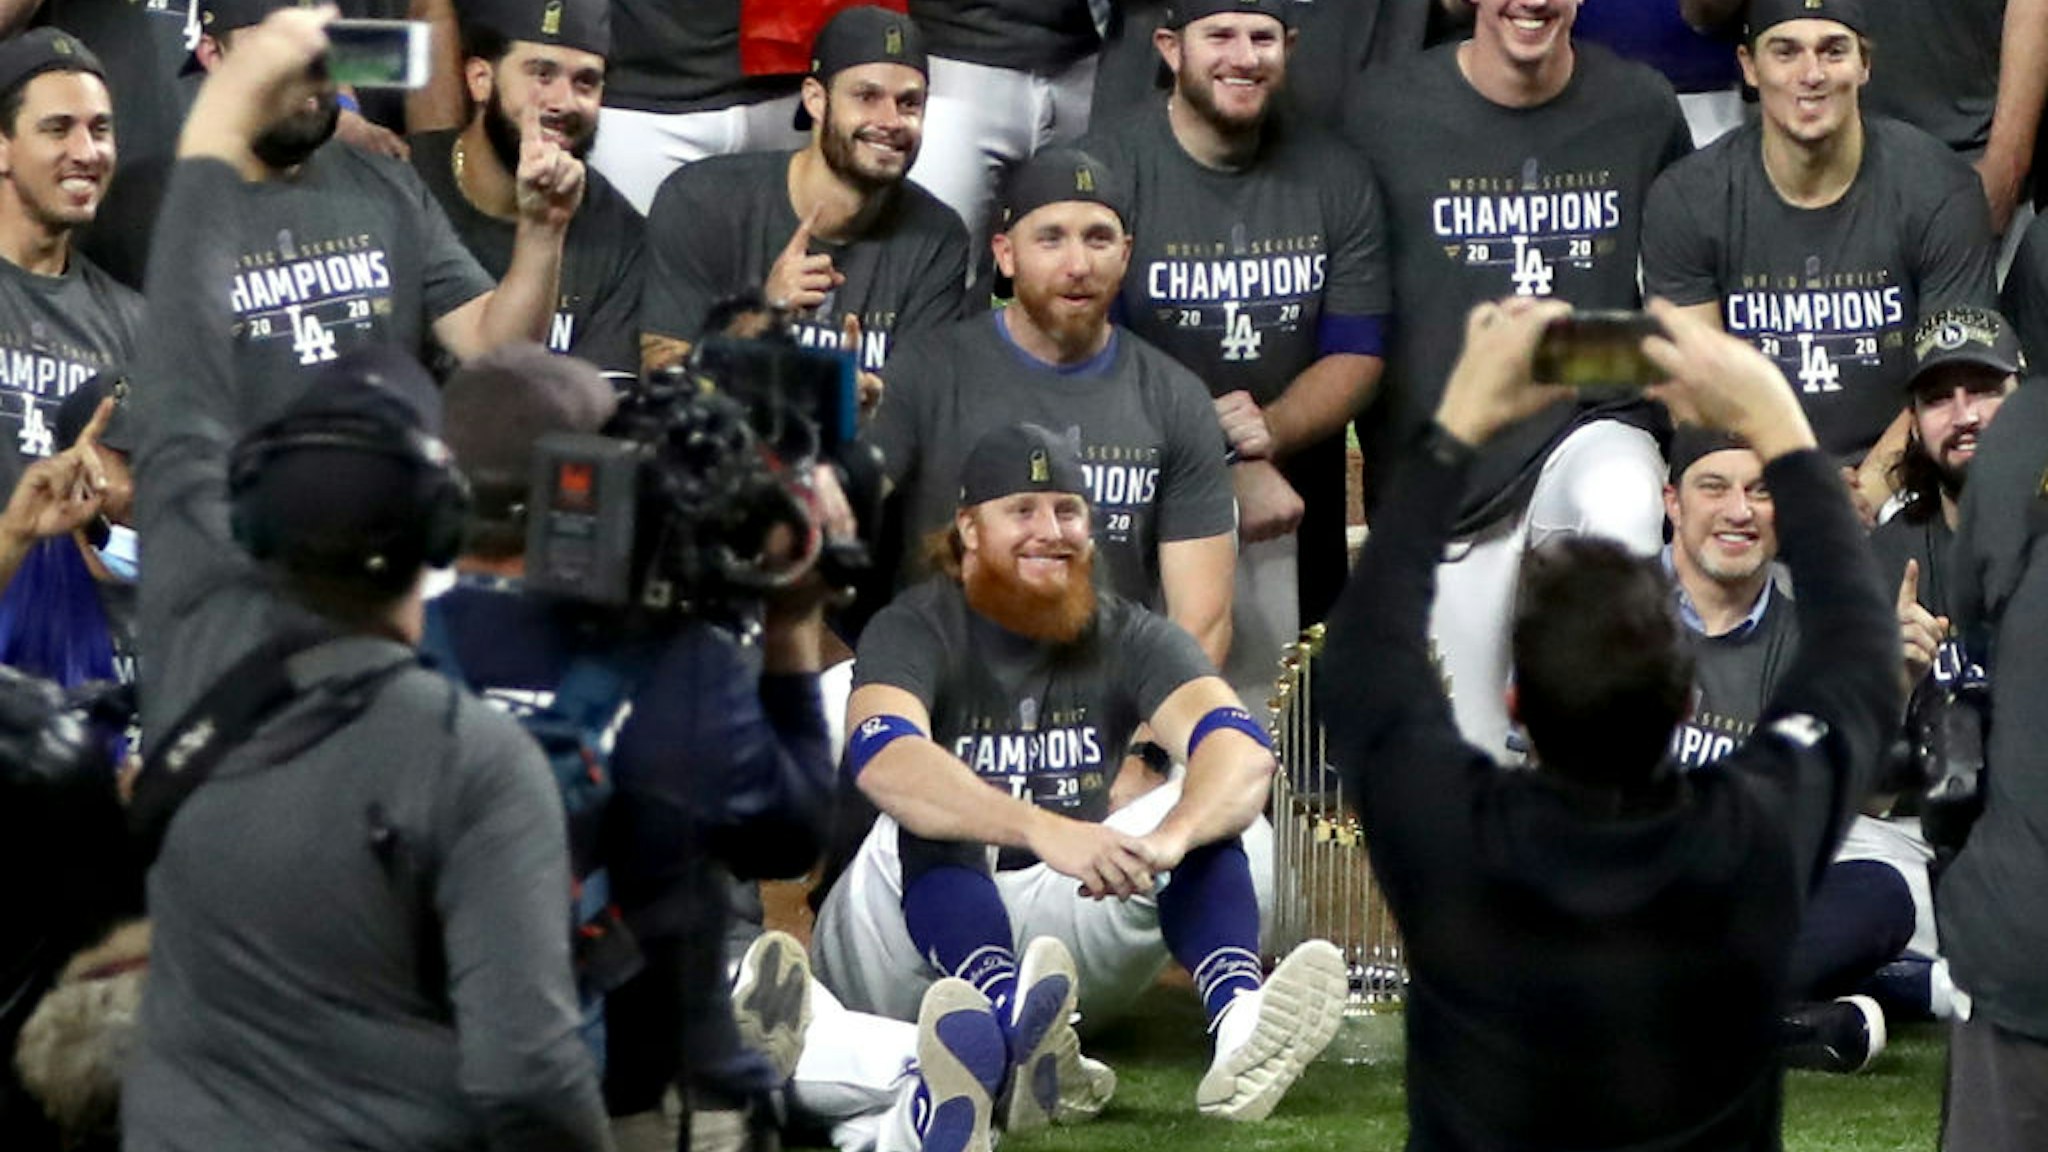 ustin Turner #10 and the Los Angeles Dodgers pose for a photo after defeating the Tampa Bay Rays 3-1 in Game Six to win the 2020 MLB World Series at Globe Life Field on October 27, 2020 in Arlington, Texas.